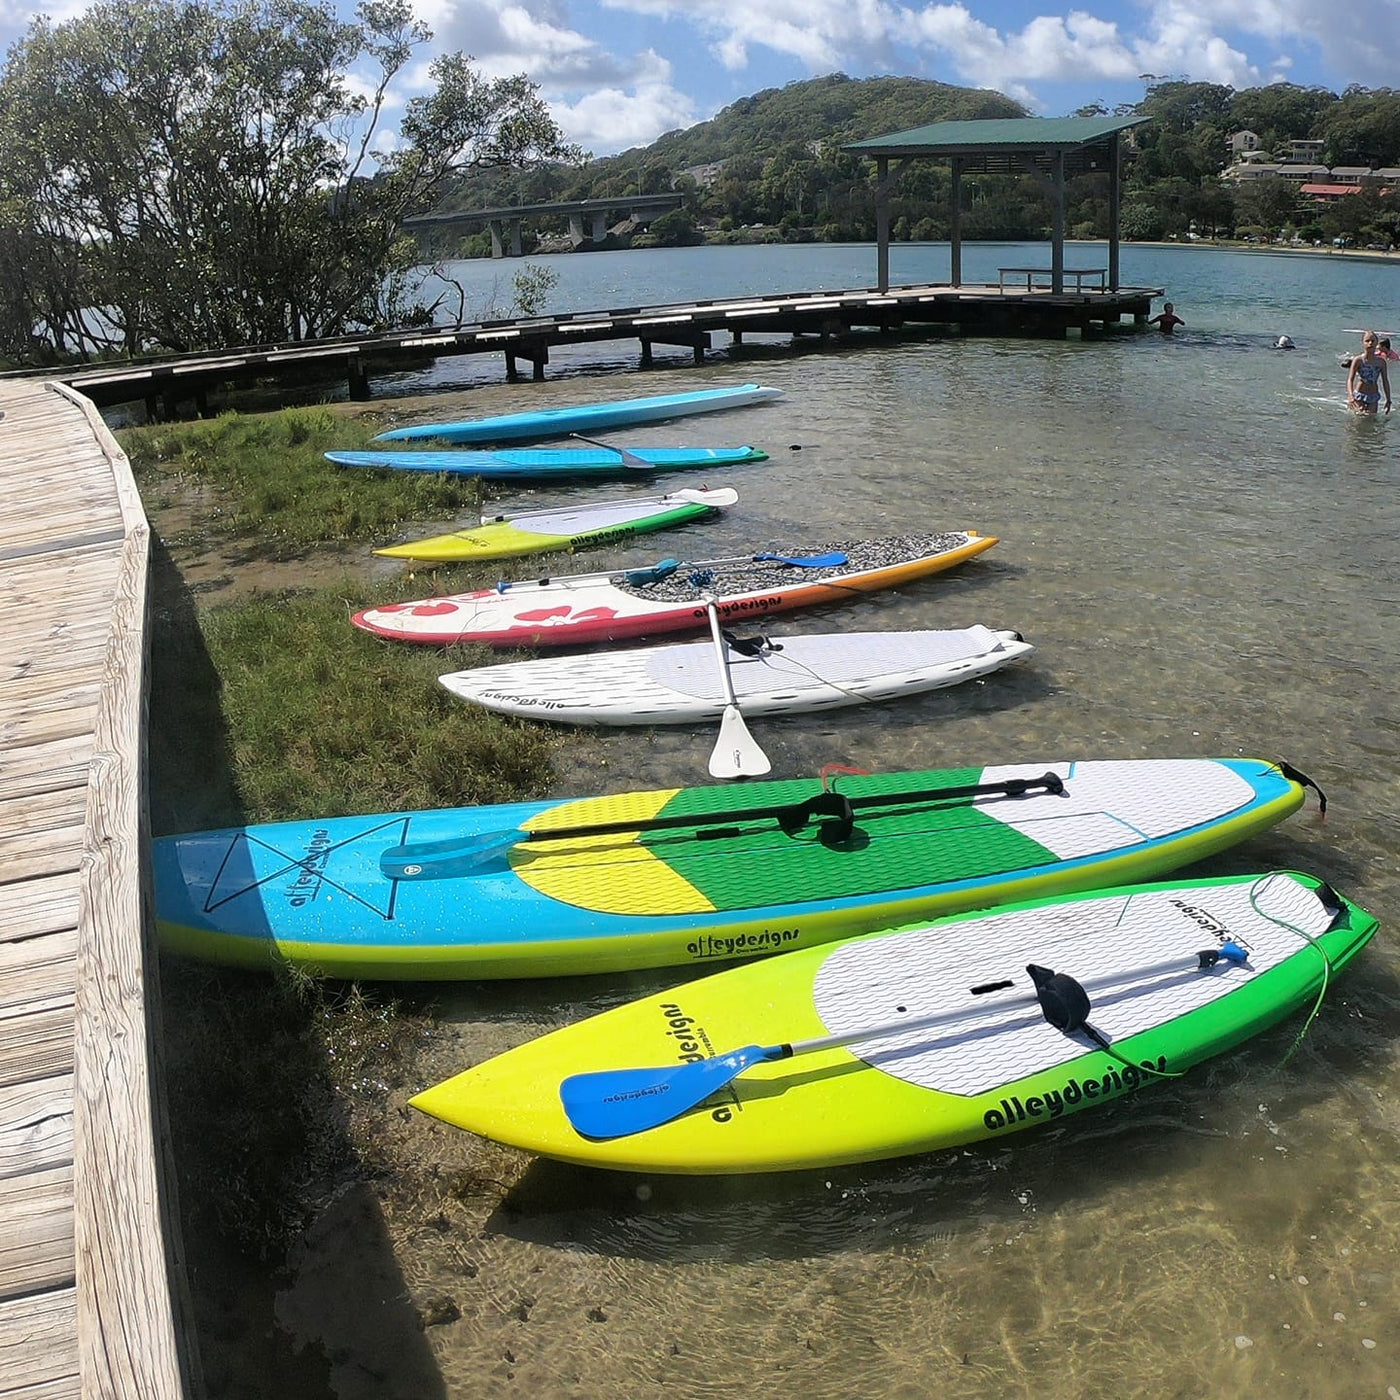 HIRE SUP ALL WEEK 5-7 Days $120 - Alleydesigns  Pty Ltd                                             ABN: 44165571264